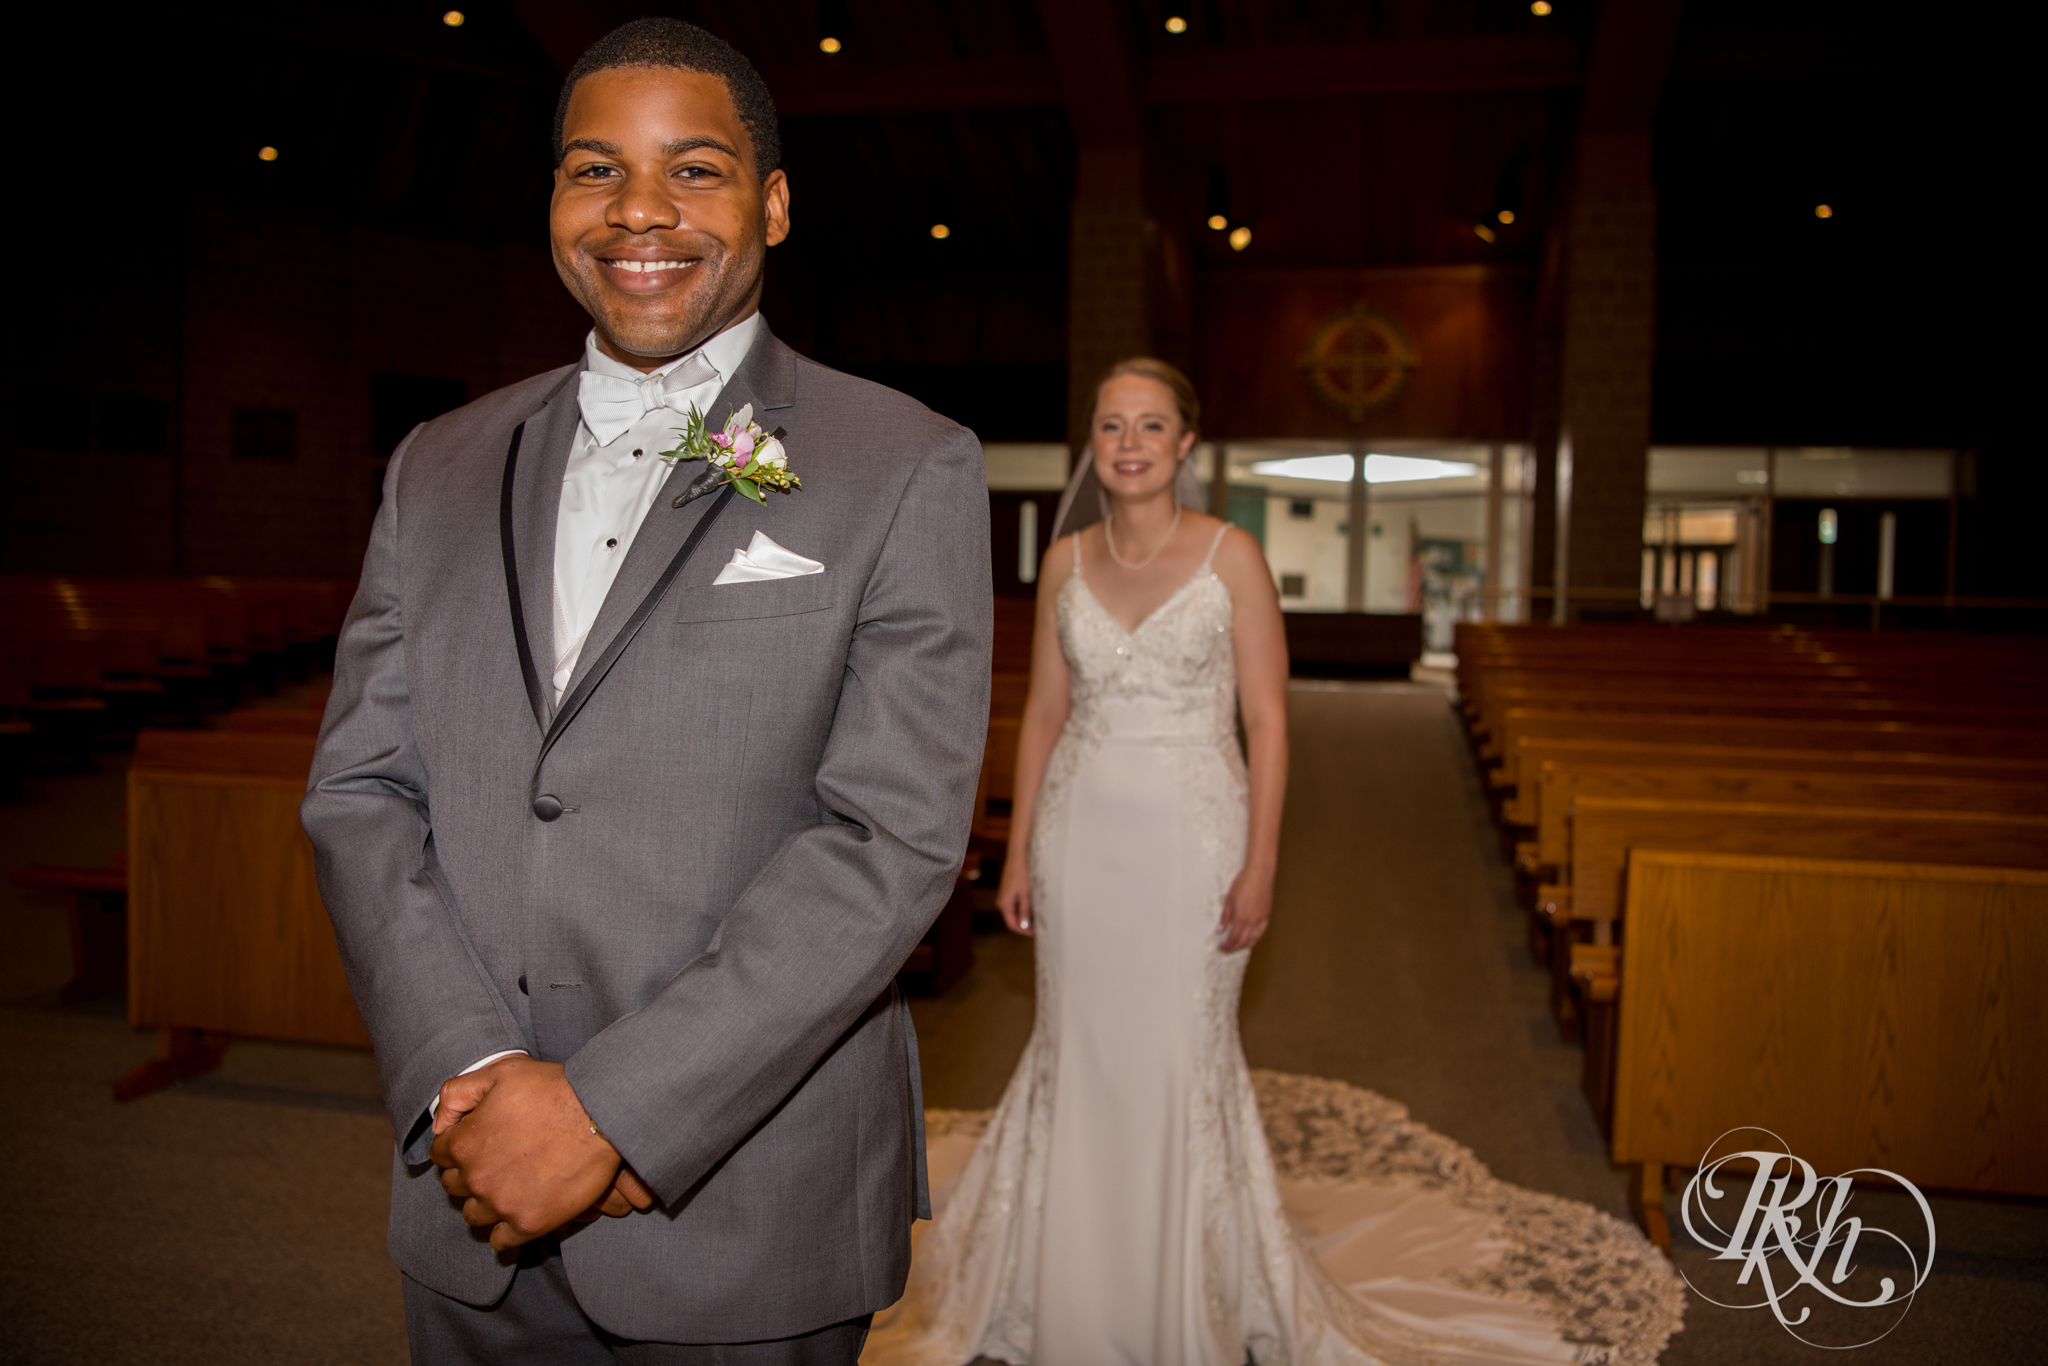 Black groom and white bride share first look at church in Richfield, Minnesota.